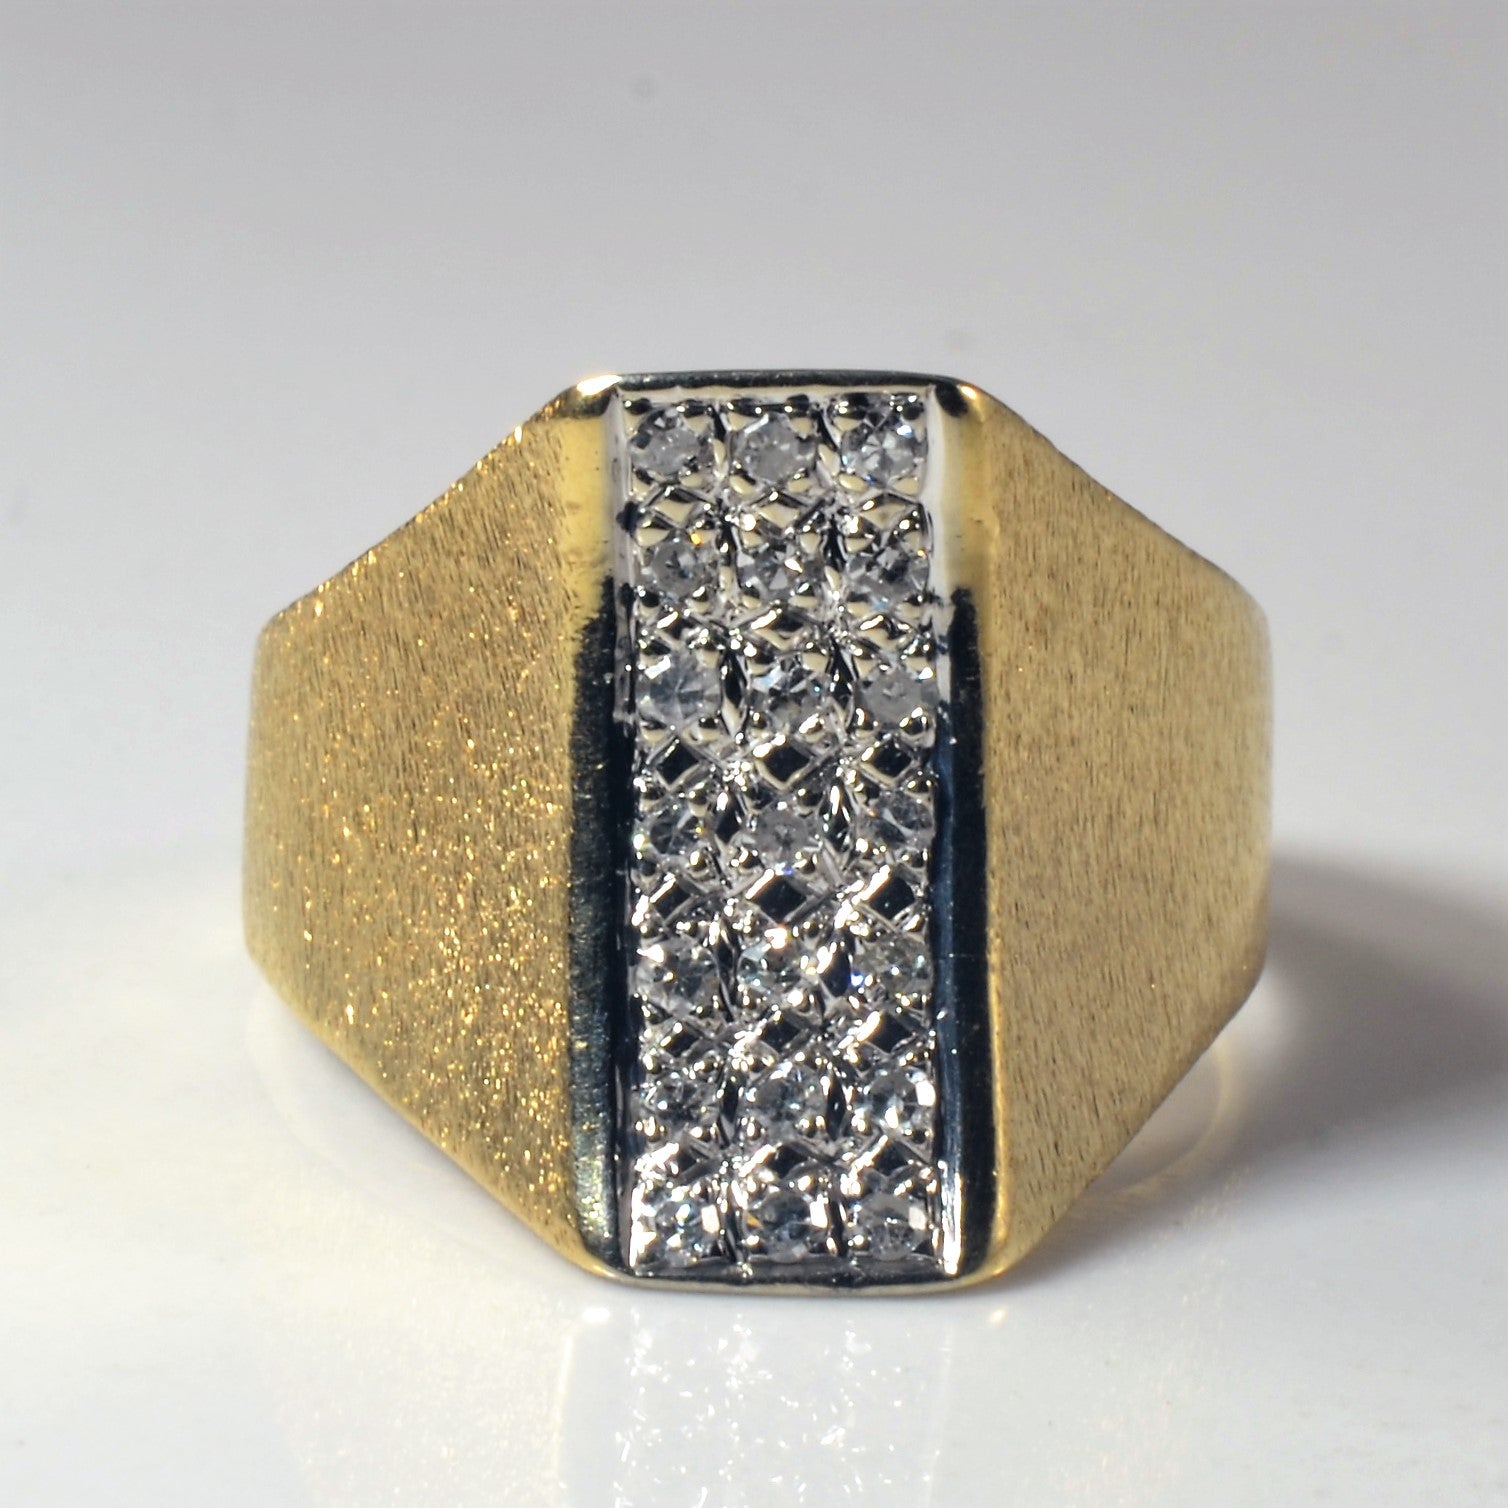 Tapered Pave Cluster Diamond Ring | 0.21ctw | SZ 5.75 |